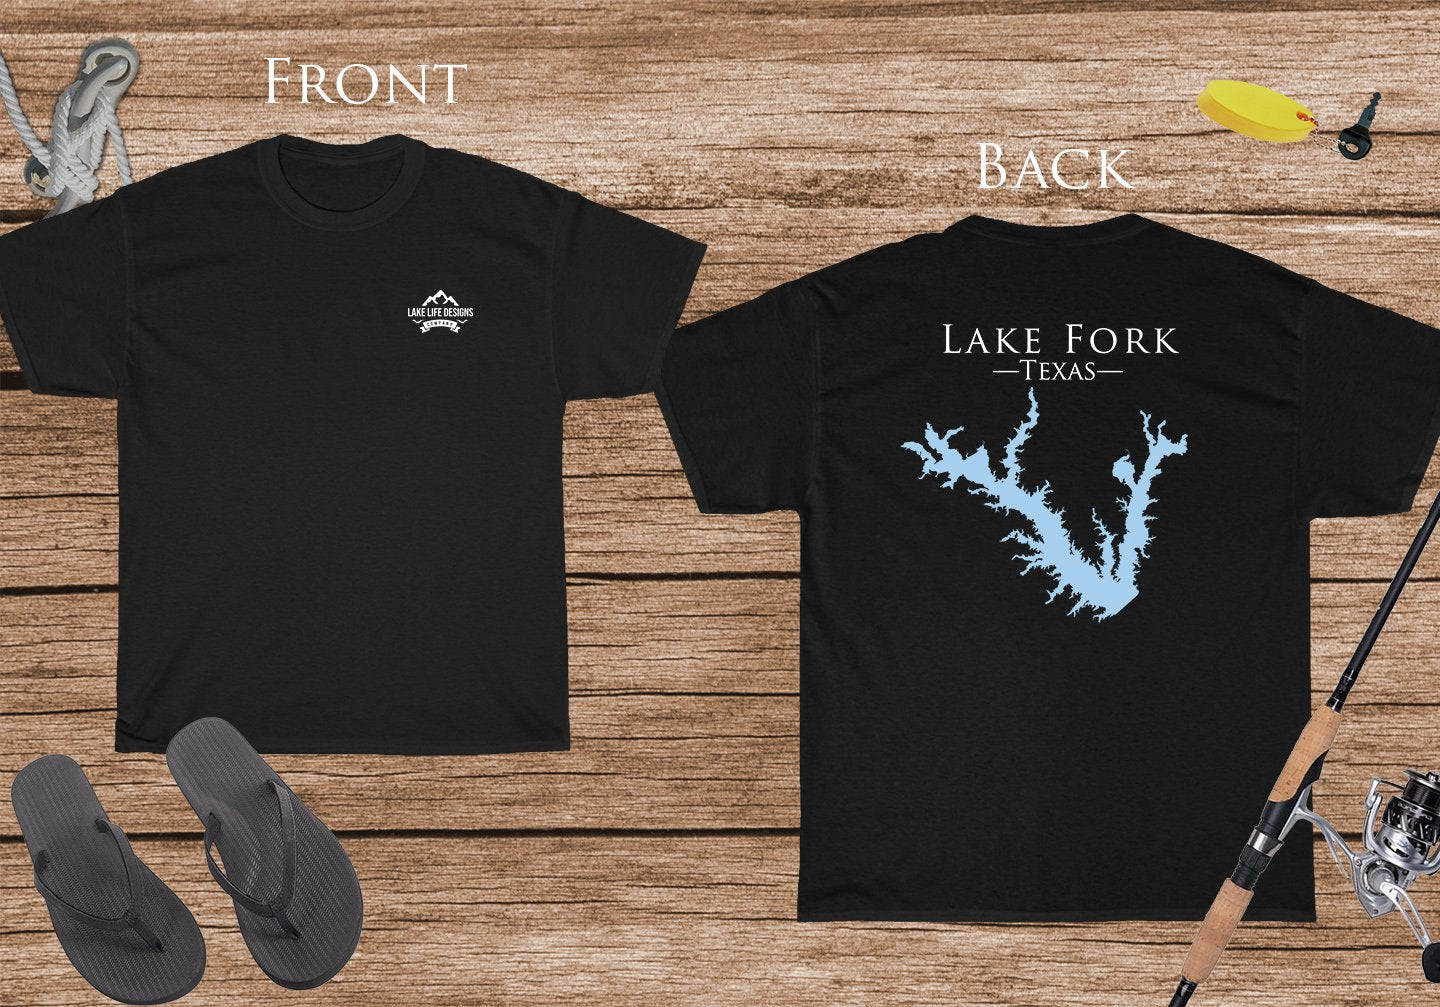 Lake Fork Texas - Cotton Short Sleeved - FRONT & BACK PRINTED - Short Sleeved Cotton Tee - Texas Lake